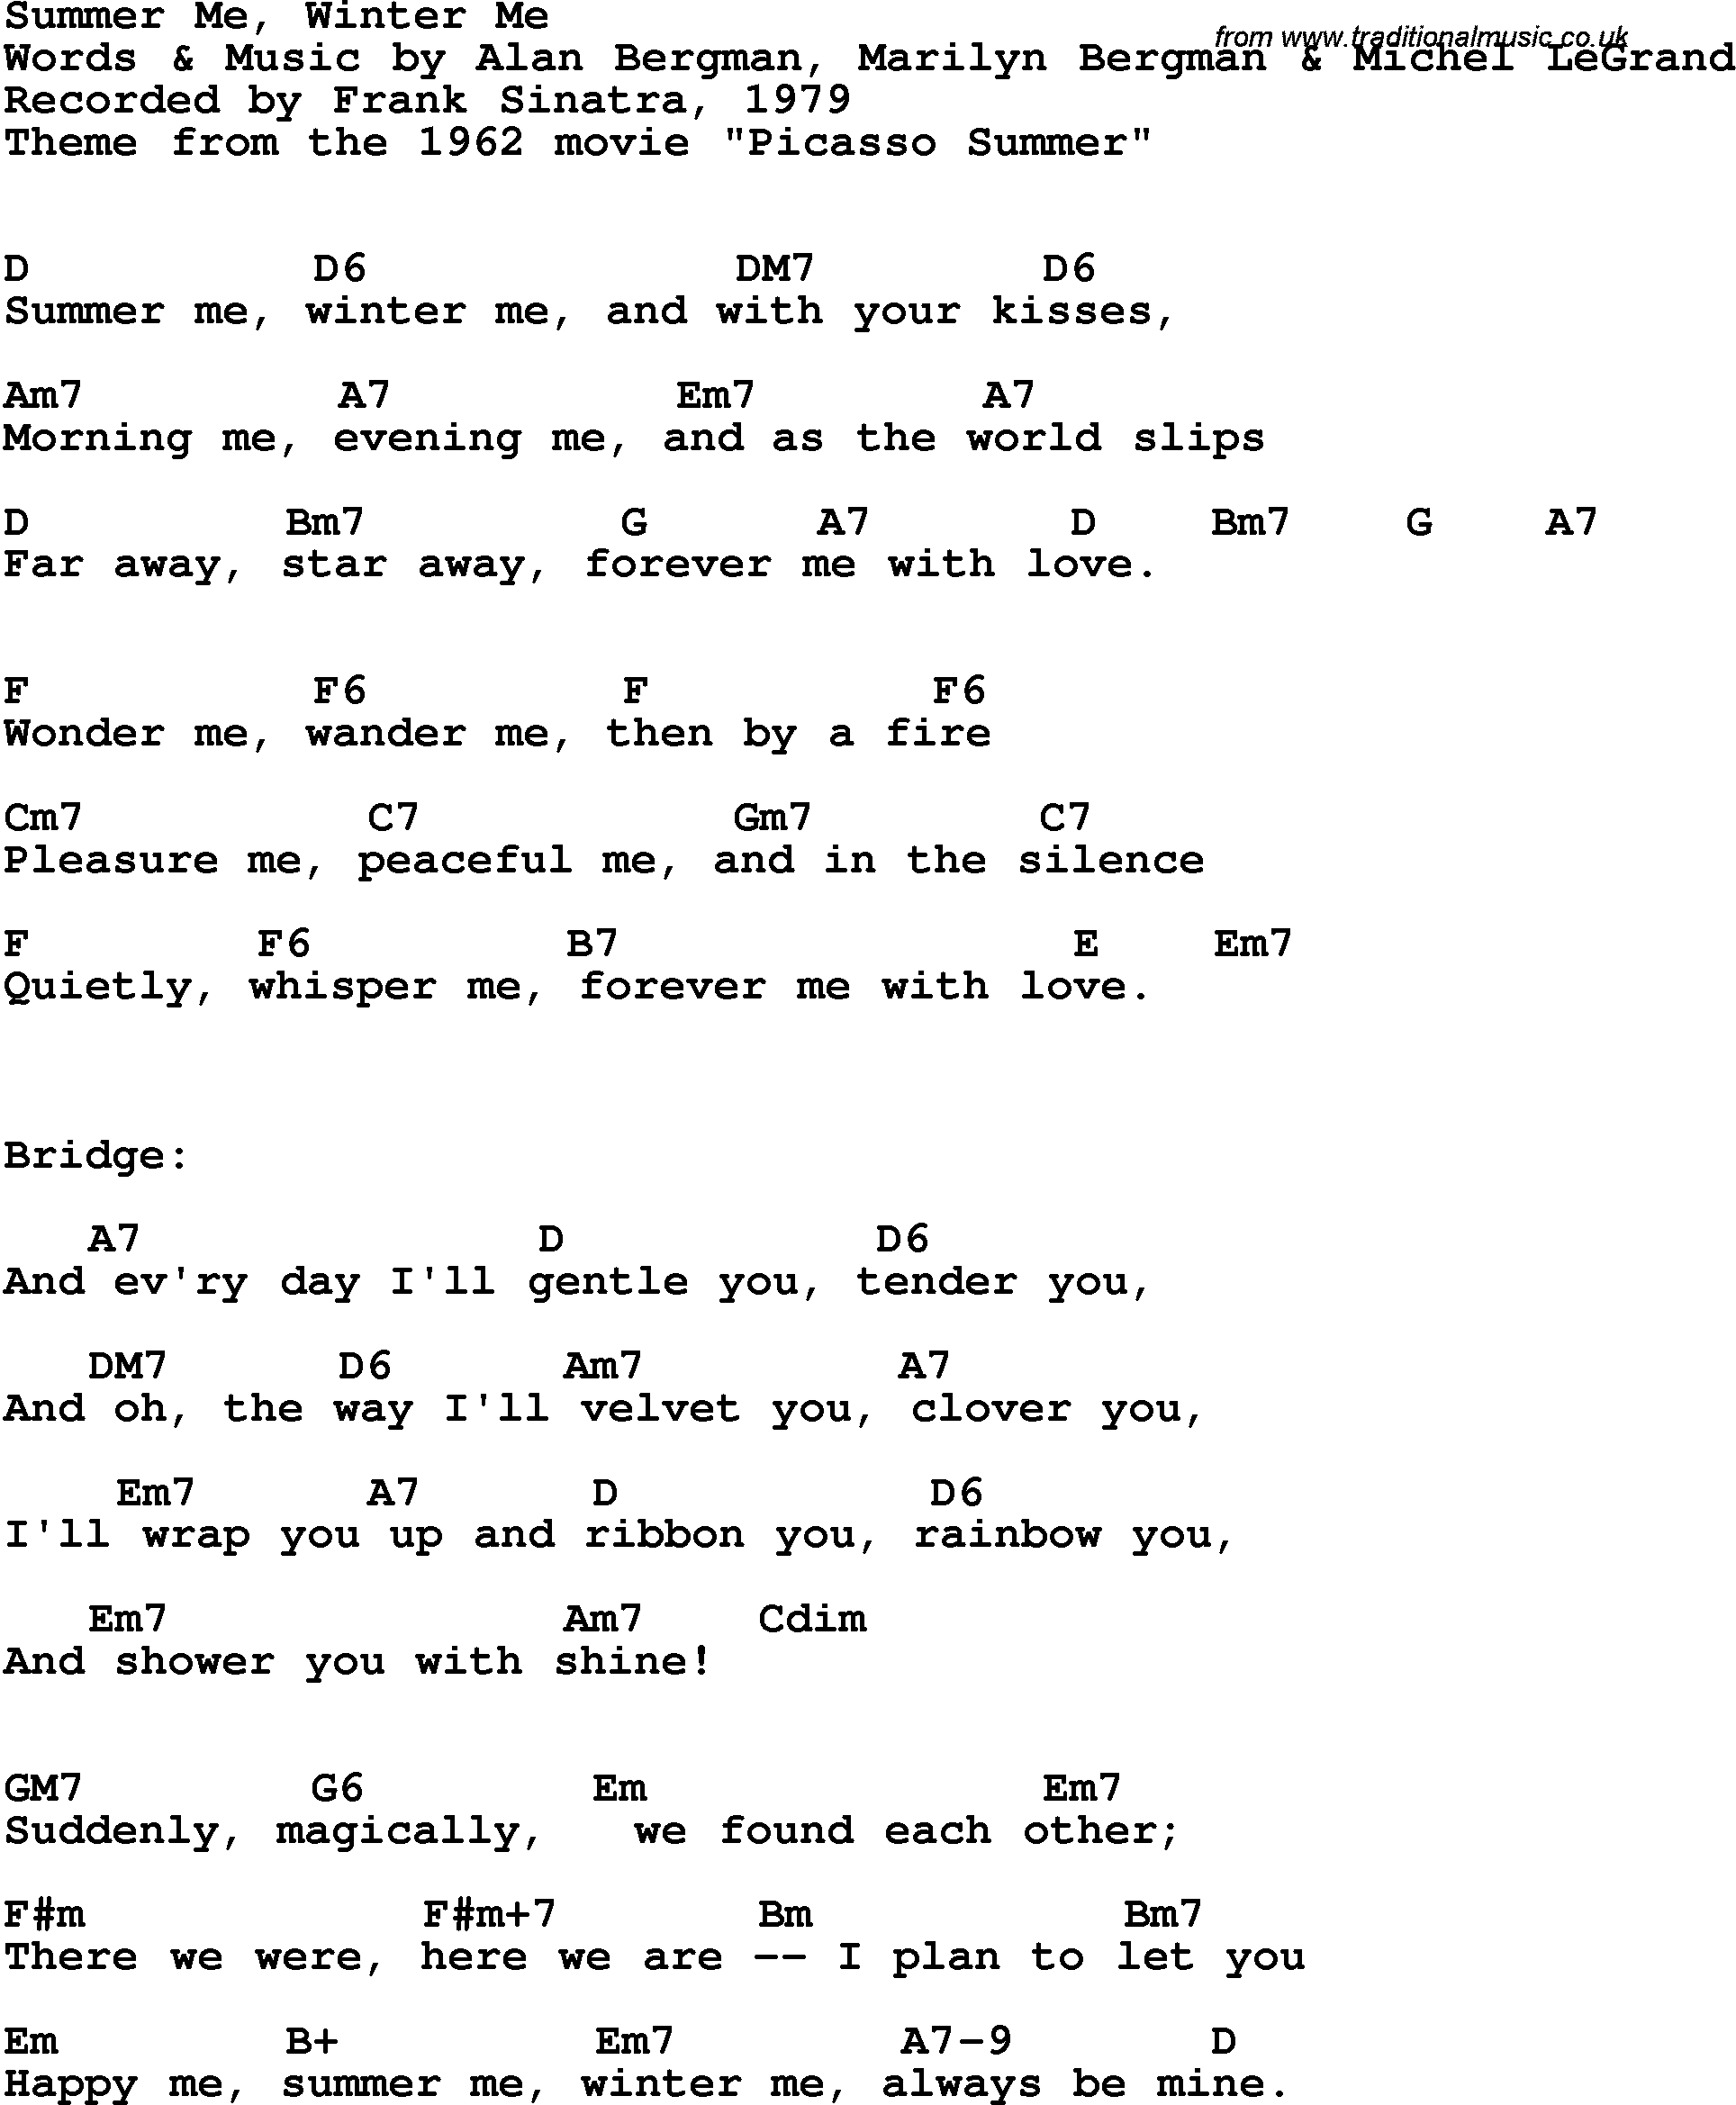 Song Lyrics with guitar chords for Summer Me, Winter Me - Frank Sinatra, 1979